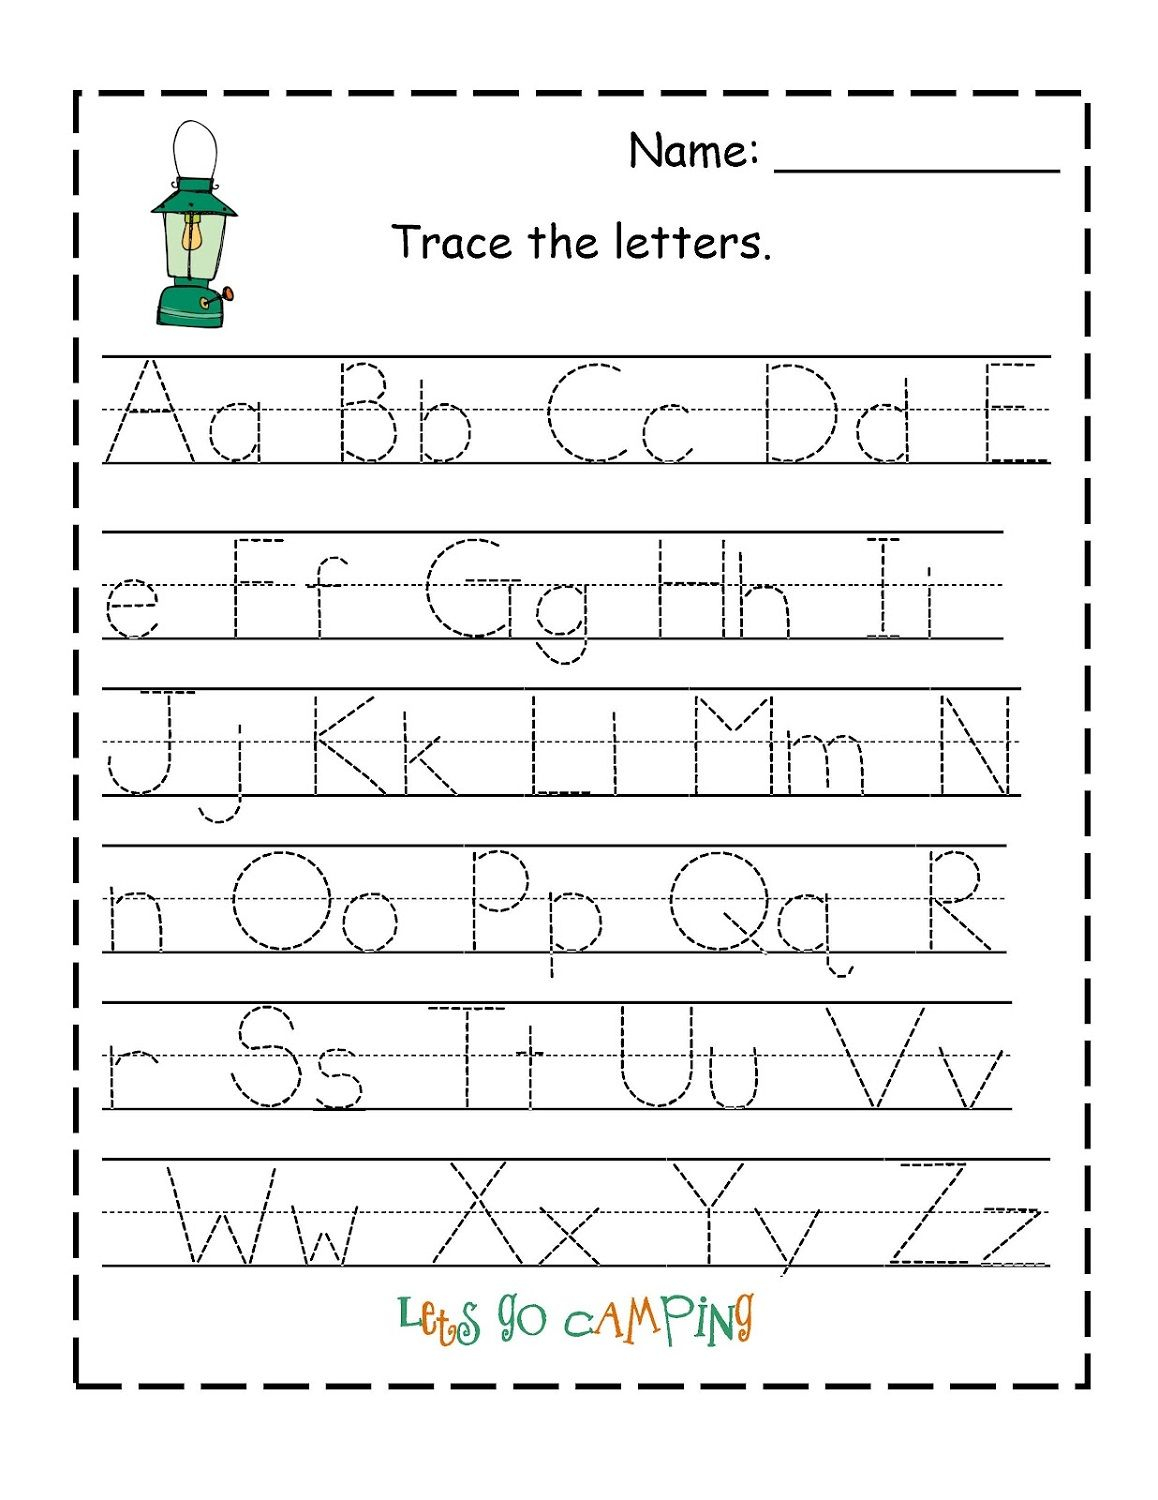 Traceable Alphabet Worksheets A-Z In 2020 | Alphabet pertaining to Alphabet Worksheets A-Z Free